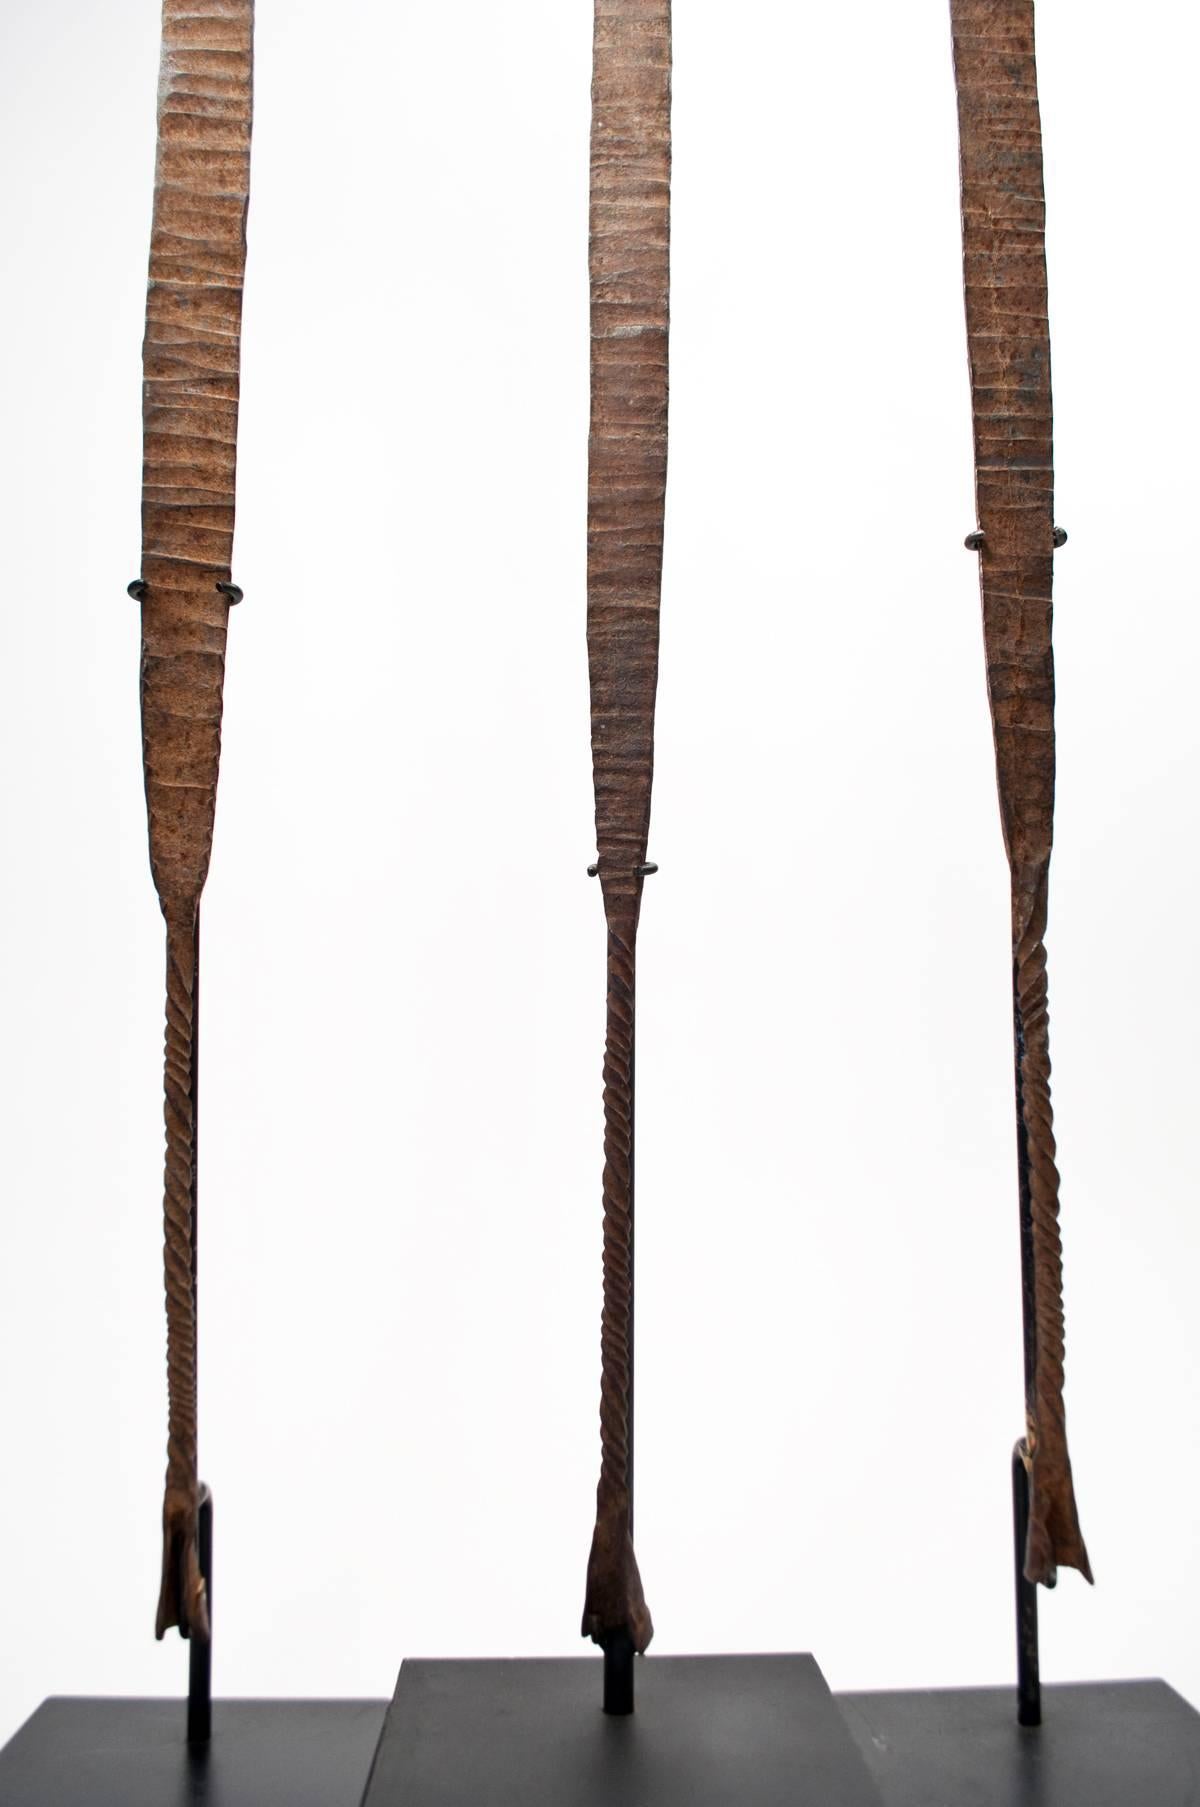 Offered by Zena Kruzick
Early 20th century tribal iron currency from the Idoma of Nigeria, Africa
Cross River region

Iron currency made in the shape of a hoe, like these examples, were used in trade for bridal dowries and other important